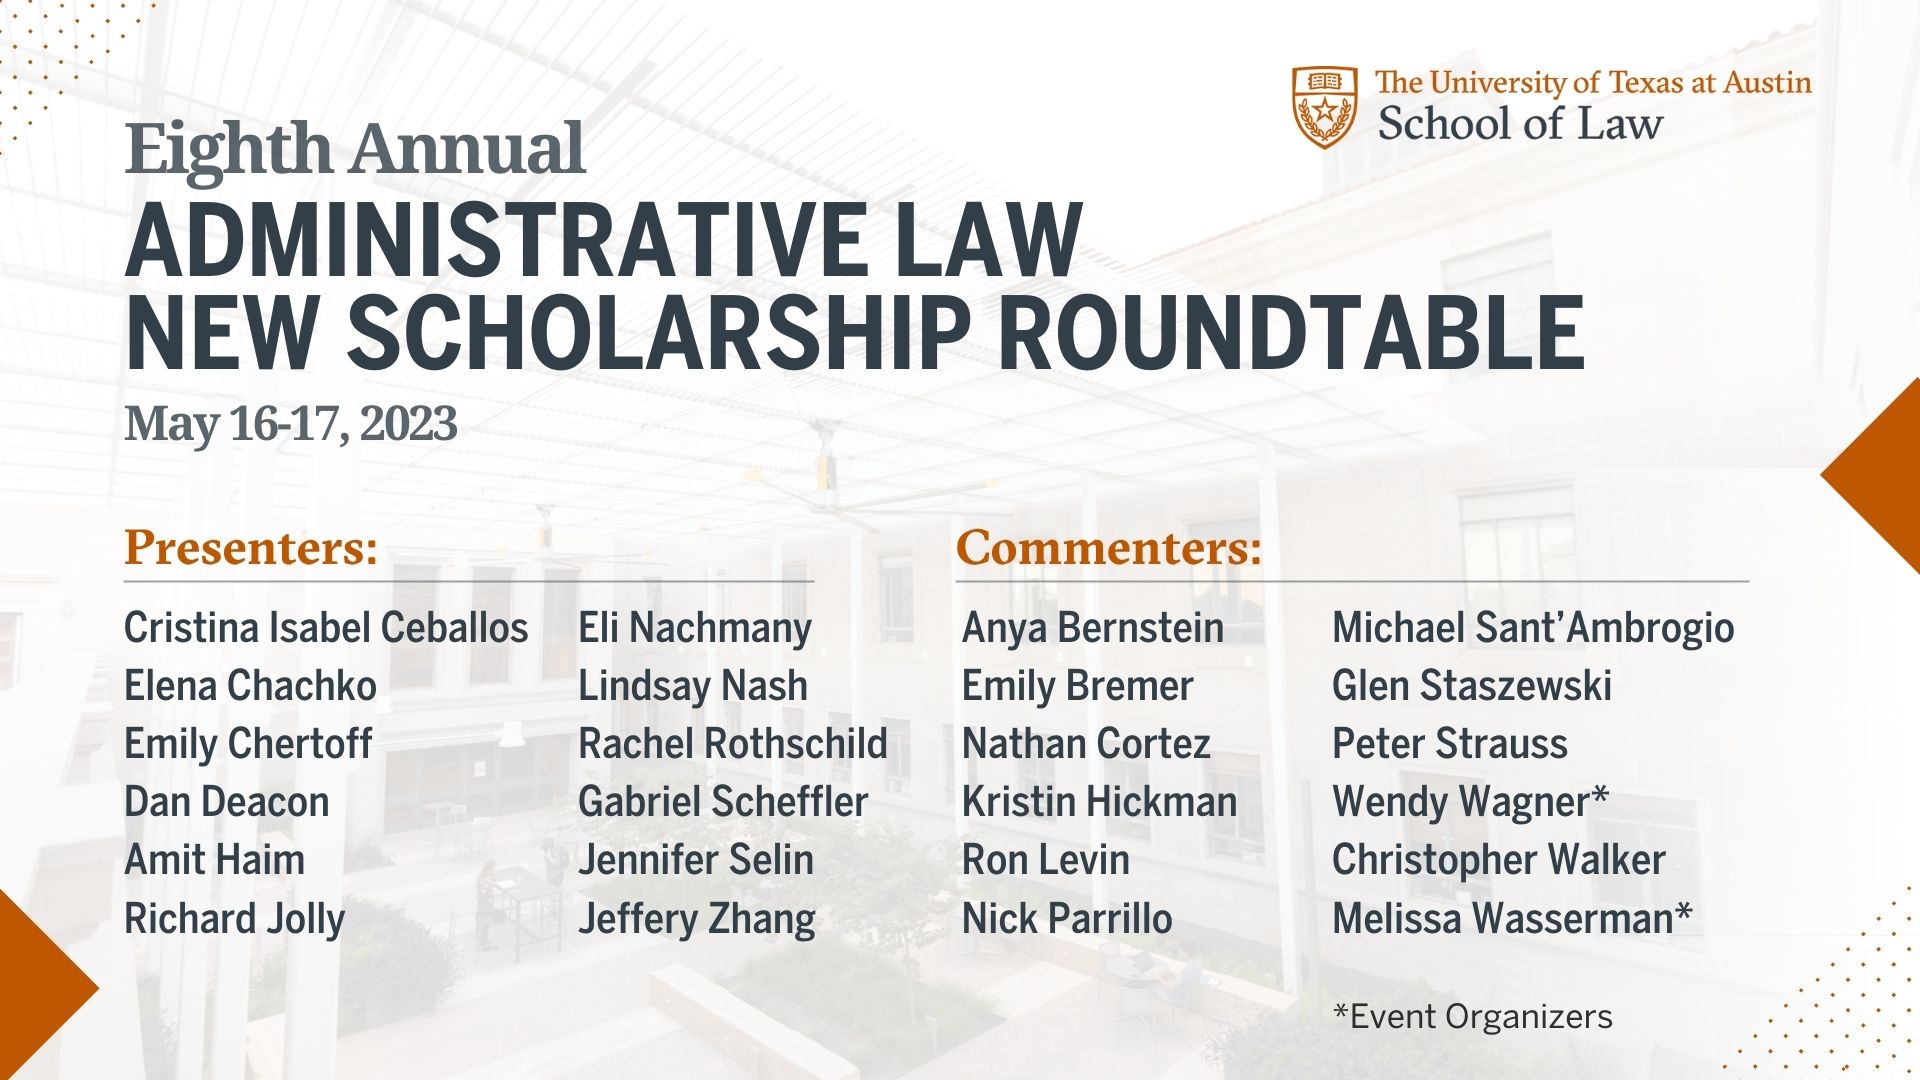 Texas Law Hosts Eighth Annual Administrative Law New Scholarship Roundtable PRESENTERS & COMMENTERS Cristina Isabel Ceballos, Curbing the President’s Power Over Criminal Administrative Law Commenter: Peter Strauss Elena Chachko, Toward Regulatory Protectionism: The International Elements of Agency Power Commenter: Michael Sant’Ambrogio Emily Chertoff, Systemic Agency Enforcement Challenges Commenter: Glen Staszewski Lunch Time Speaker: Kathleen Claussen (co-author Kristin Blankely), Alternative Adjudication Dan Deacon, Responding to Alternatives Commenter: Anya Bernstein Amit Haim, Binding Language in Government Guidance Documents Commenter: Melissa Wasserman Richard Jolly, The Administrative State’s Jury Problem Commenter: Ron Levin Eli Nachmany, Slicing up Chevron Commenter: Kristin Hickman Lindsay Nash, Inventing Deportation Arrests Commenter: Emily Bremer Rachel Rothschild, Juristocracy and Administrative Governance: From Benzene to Climate Commenter: Nick Parrillo Gabriel Scheffler (co-author Daniel Walters), The Concealed Administrative State Commenter: Wendy Wagner Jennifer Selin (co-author Jordan Butcher), How Free is Information? Transparency in State Government Commenter: Christopher Walker Jeffery Zhang, Administrative Law in Eras of Risk and Uncertainty Commenter: Nathan Cortez